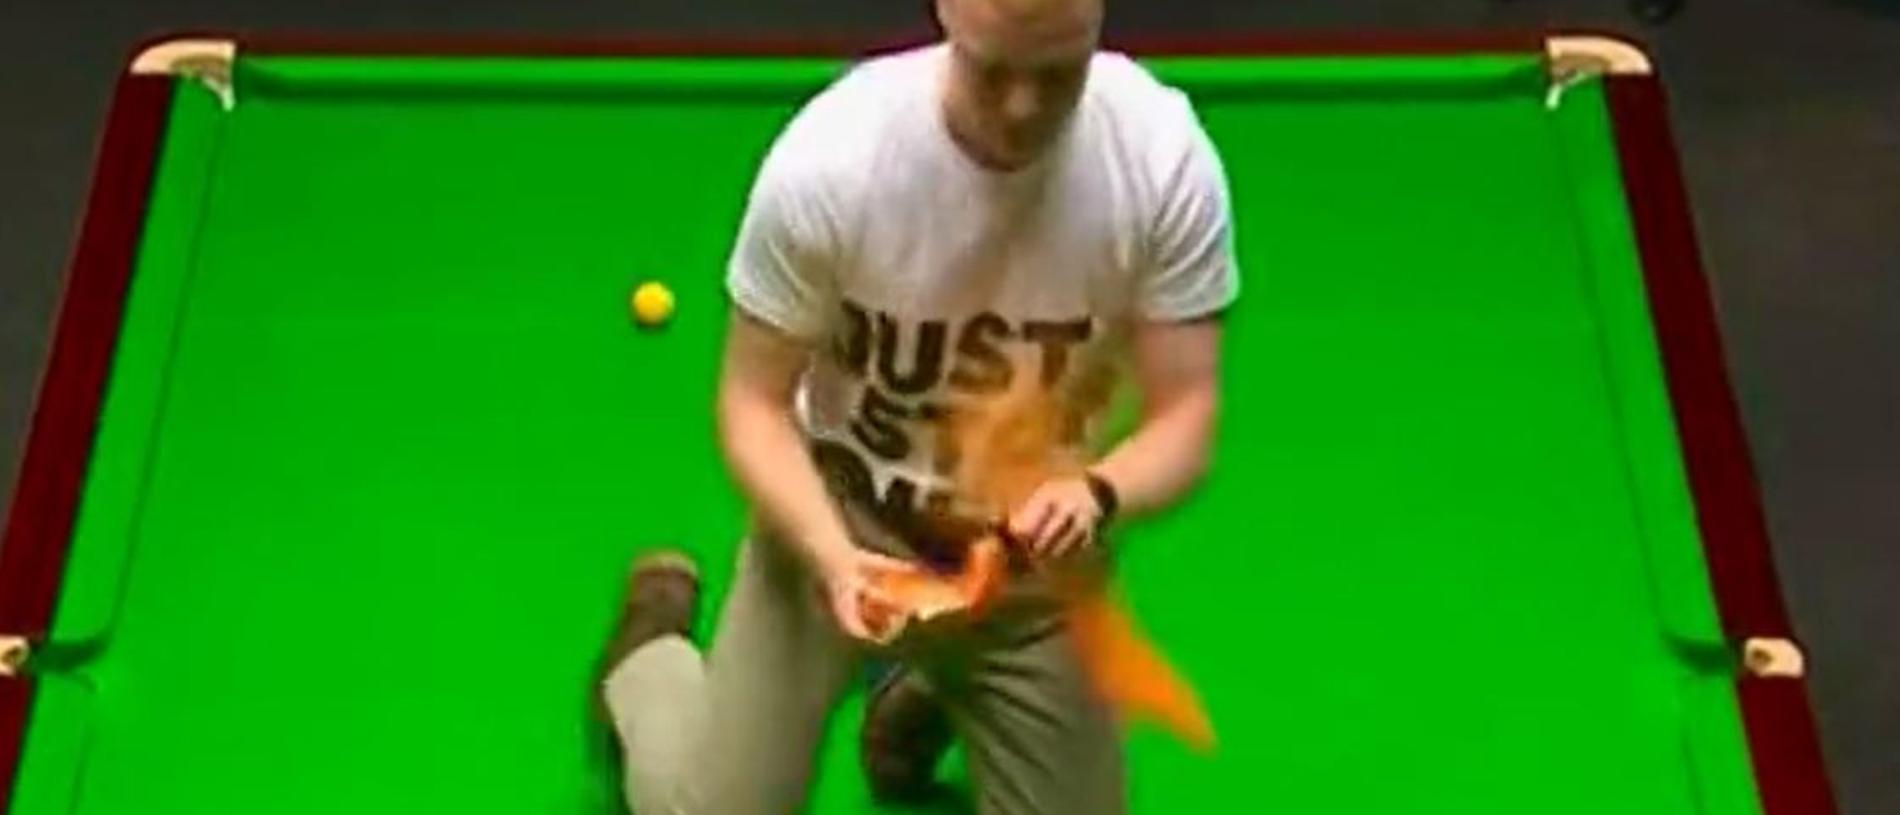 Snooker news 2023 Climate activists halt play at World Snooker Championships, video, why were they protesting, reaction, latest, updates